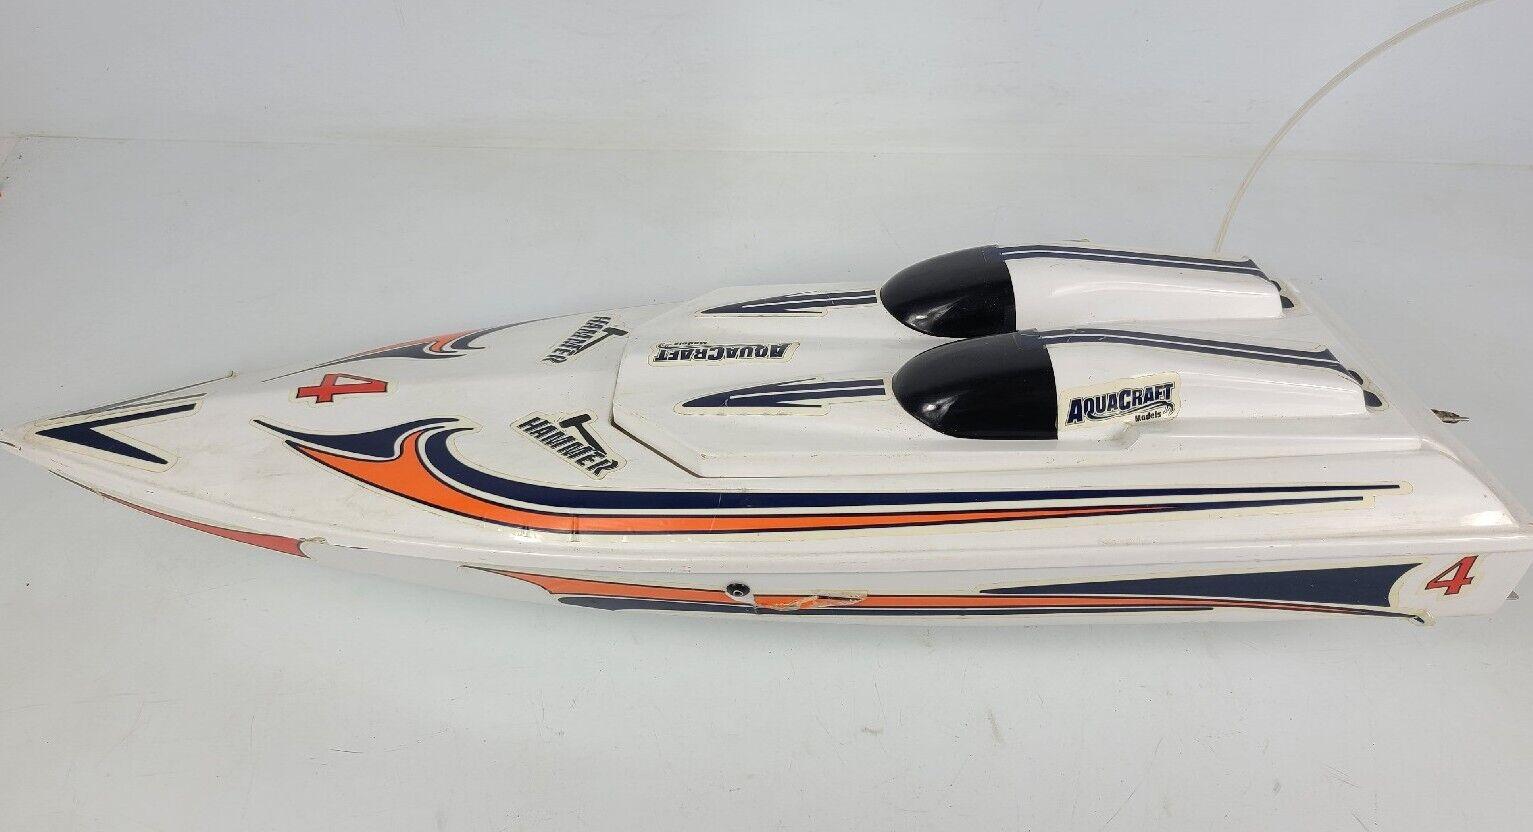 Nitro Hammer Rc Boat: High-performance Nitro Hammer RC Boat: Perfect for Thrilling Water Adventures